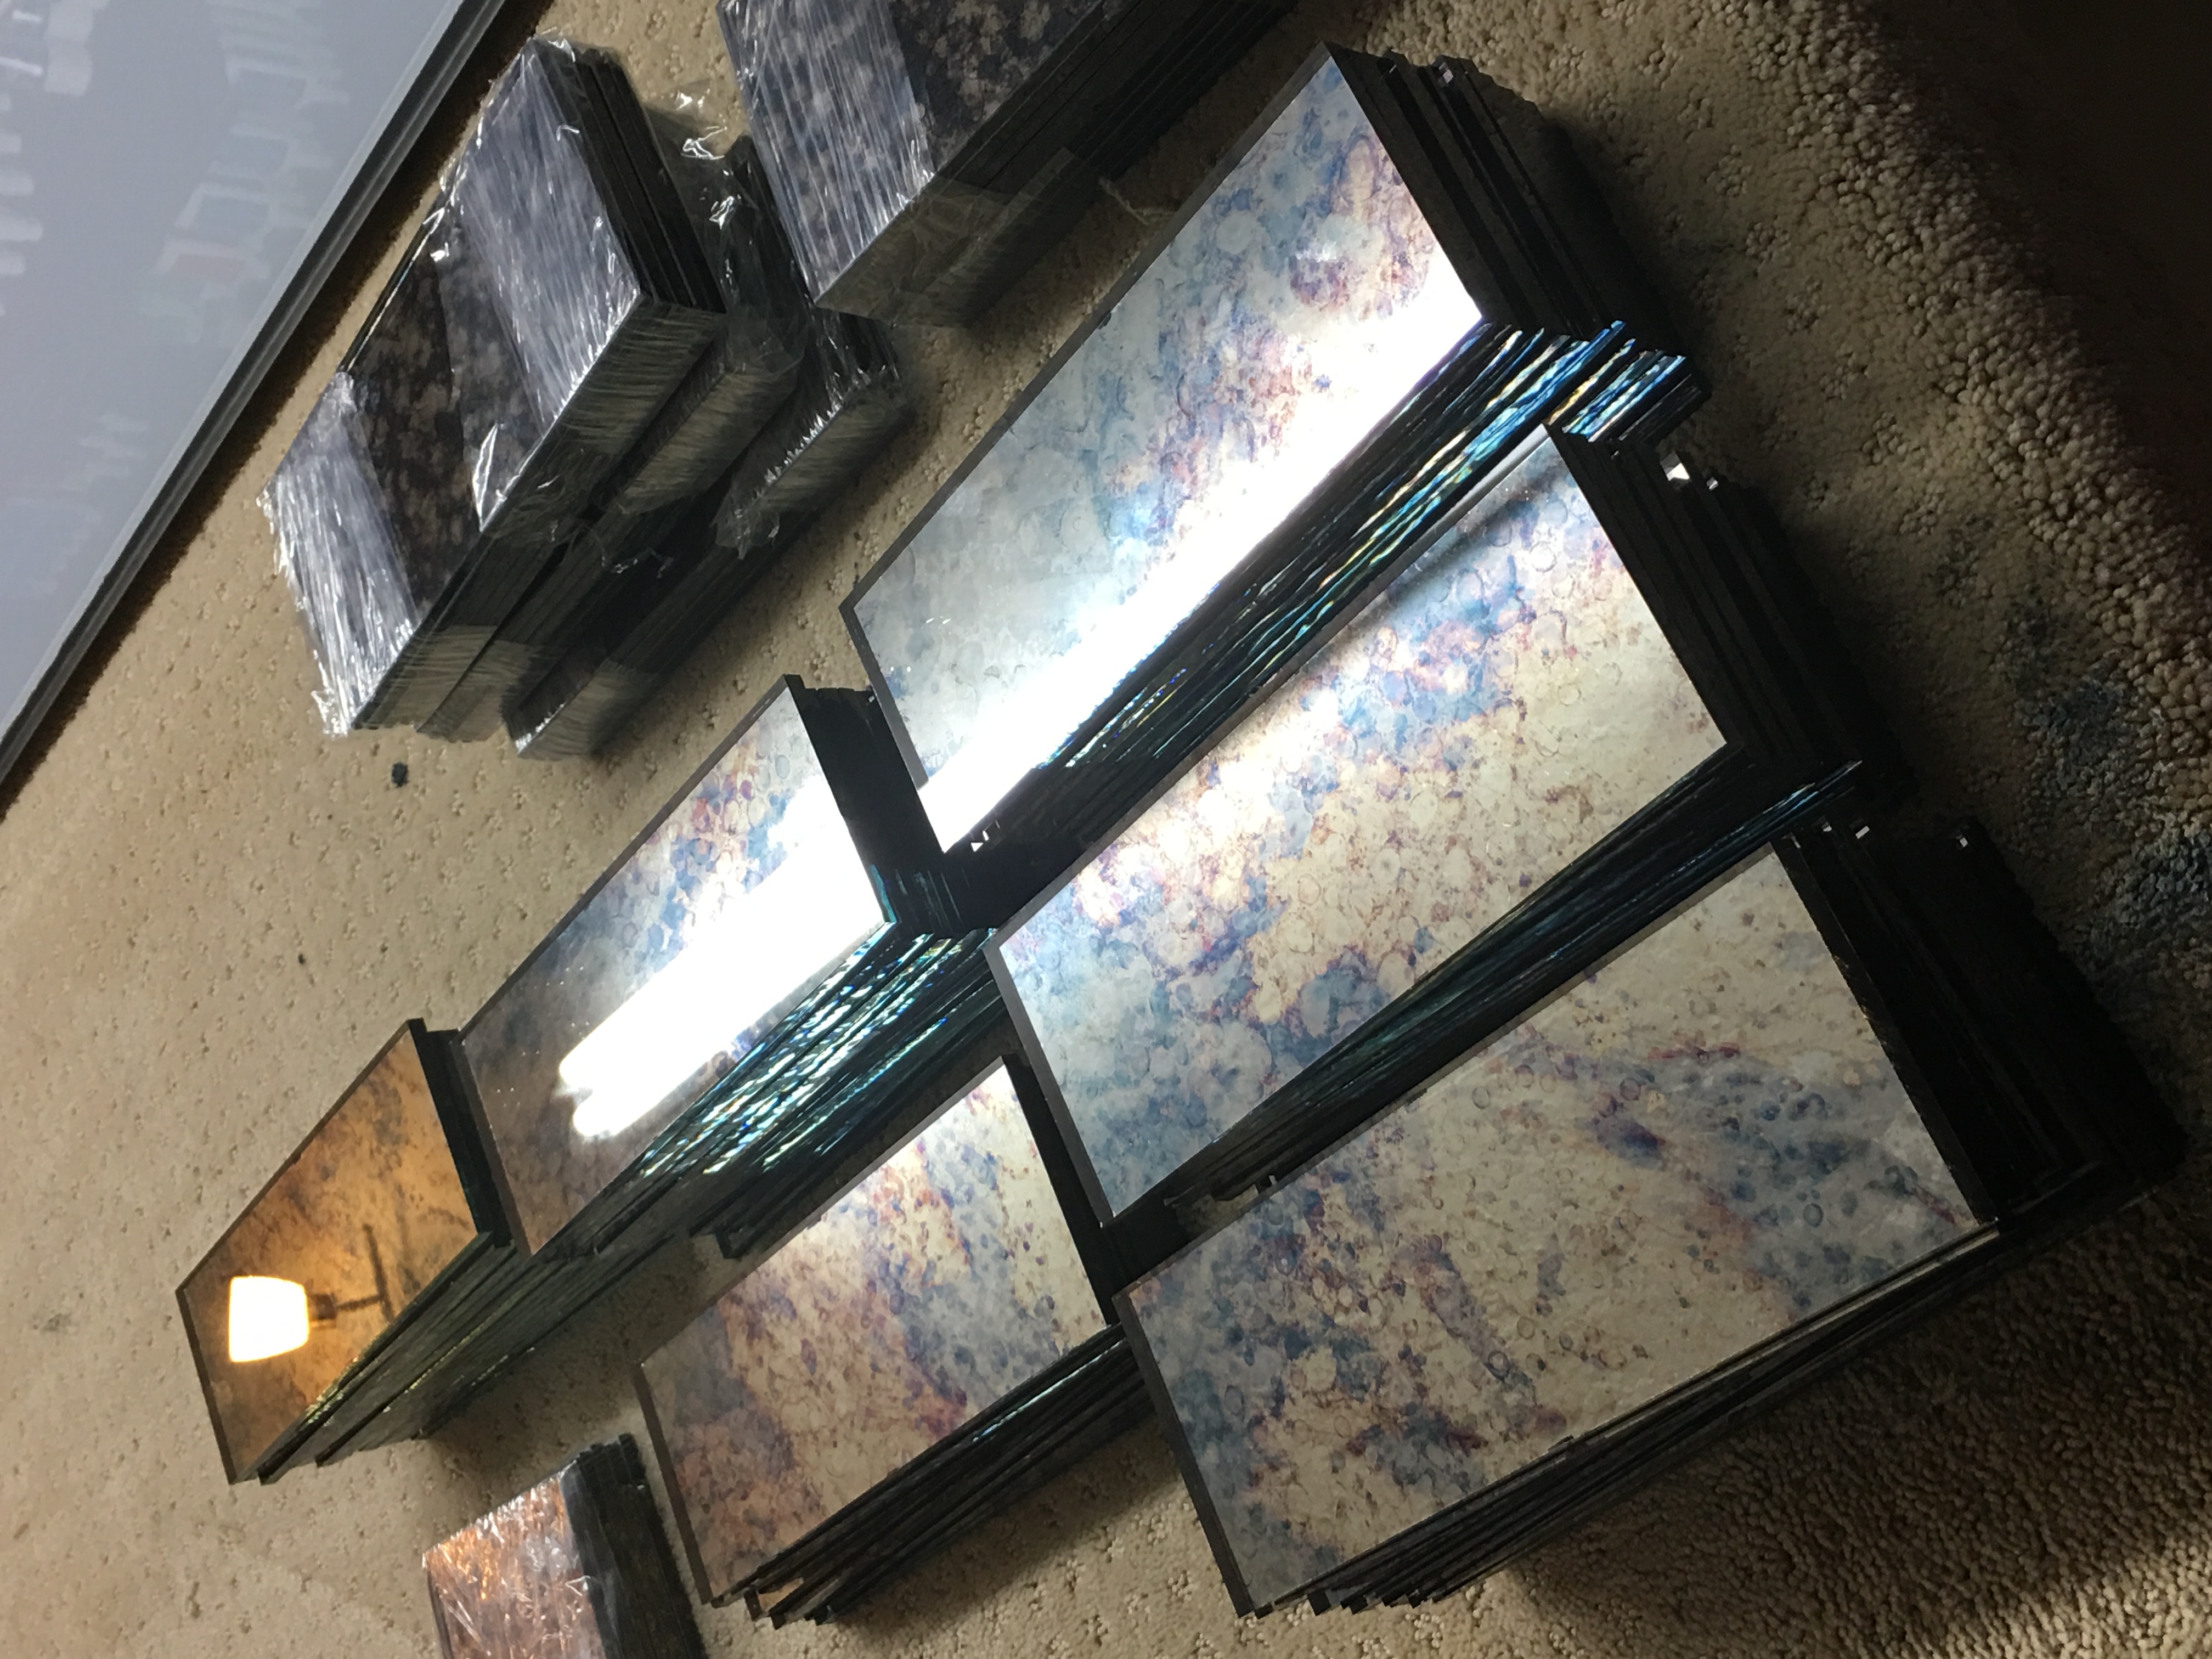 Antique Mirror Tiles | The Glass Shoppe A Division of Builders Glass of